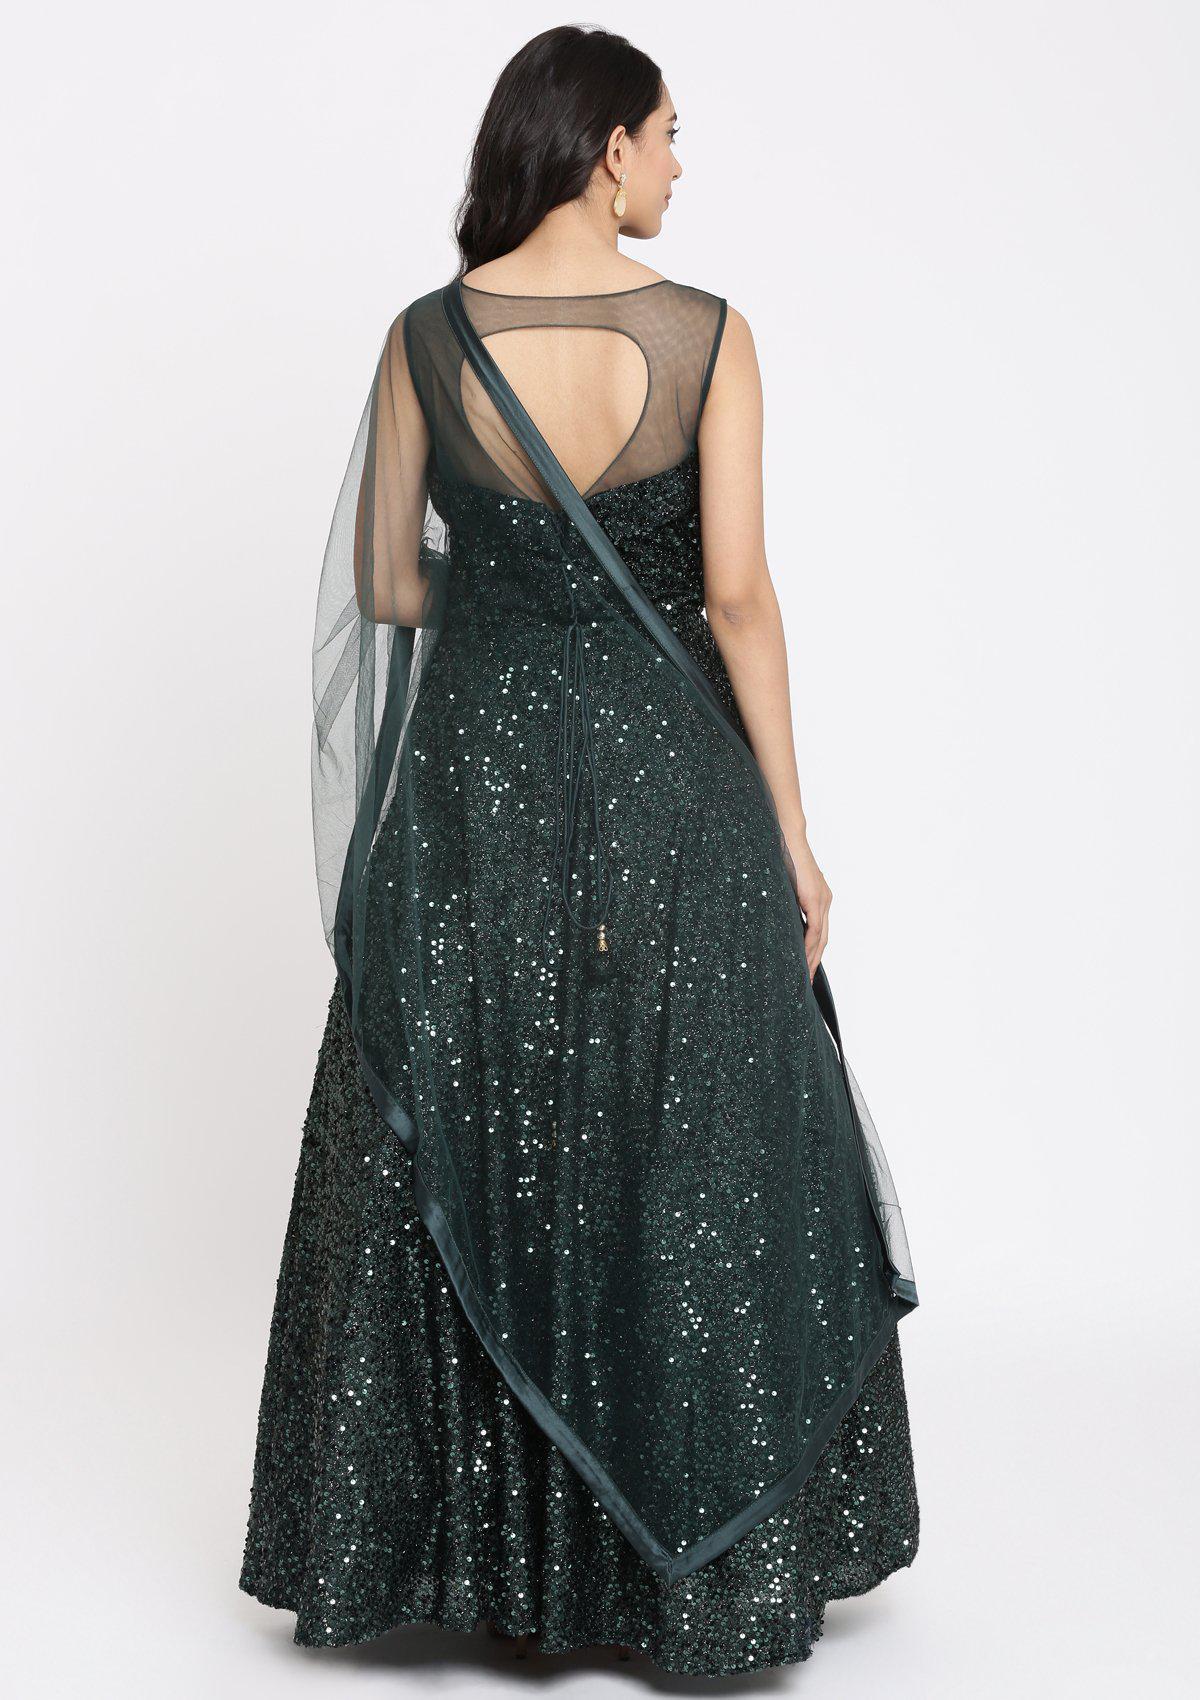 Bottle Green Sequins Imported Fabric Designer Gown-Koskii